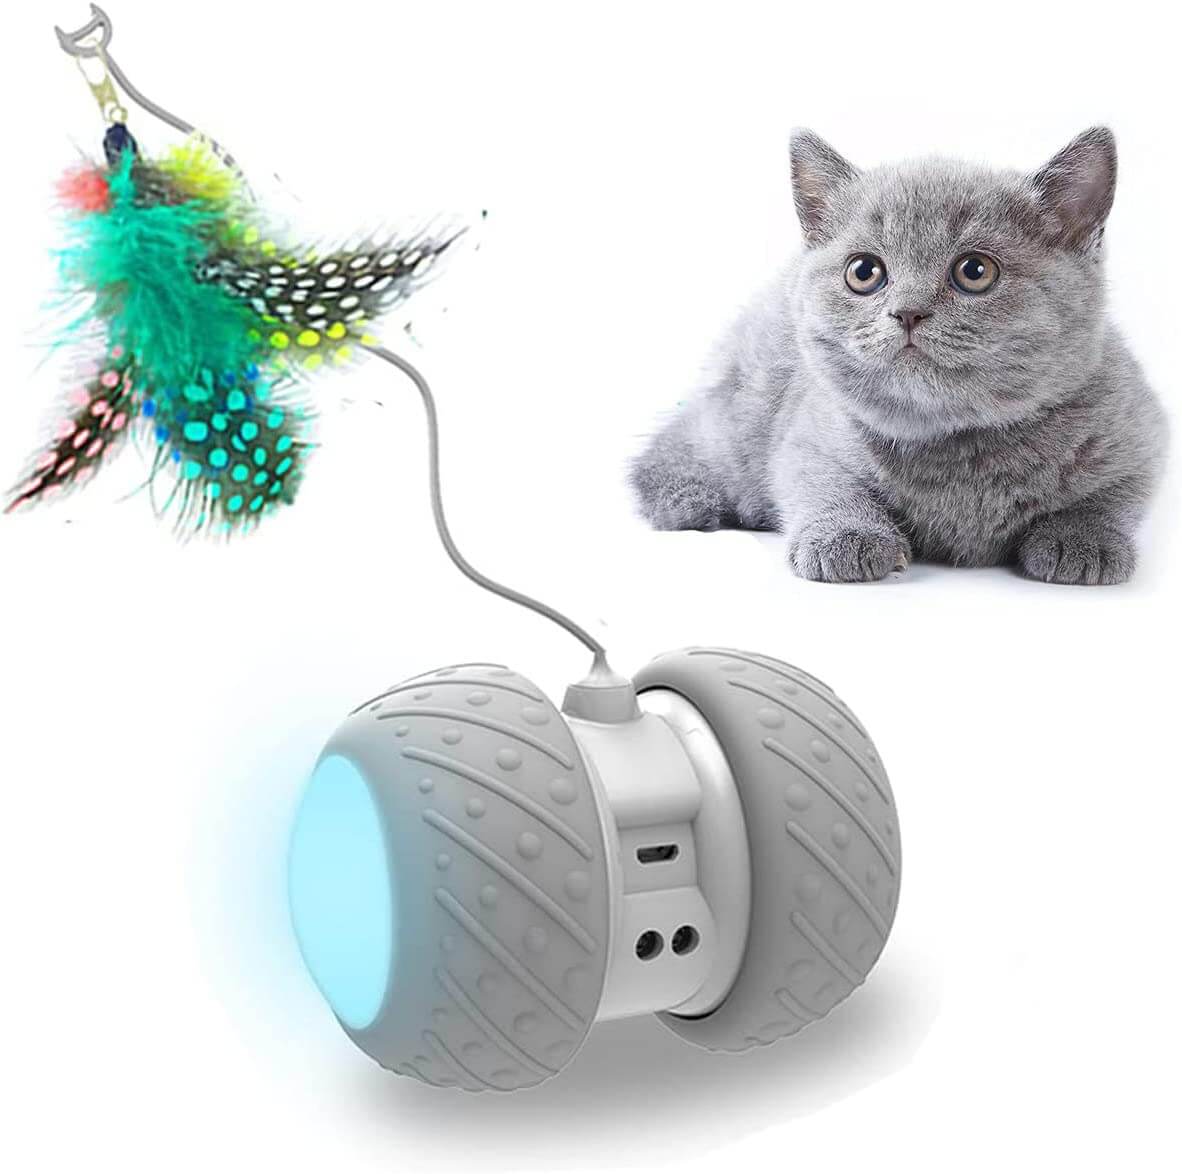 gray robotic cat toy with colorful feathers